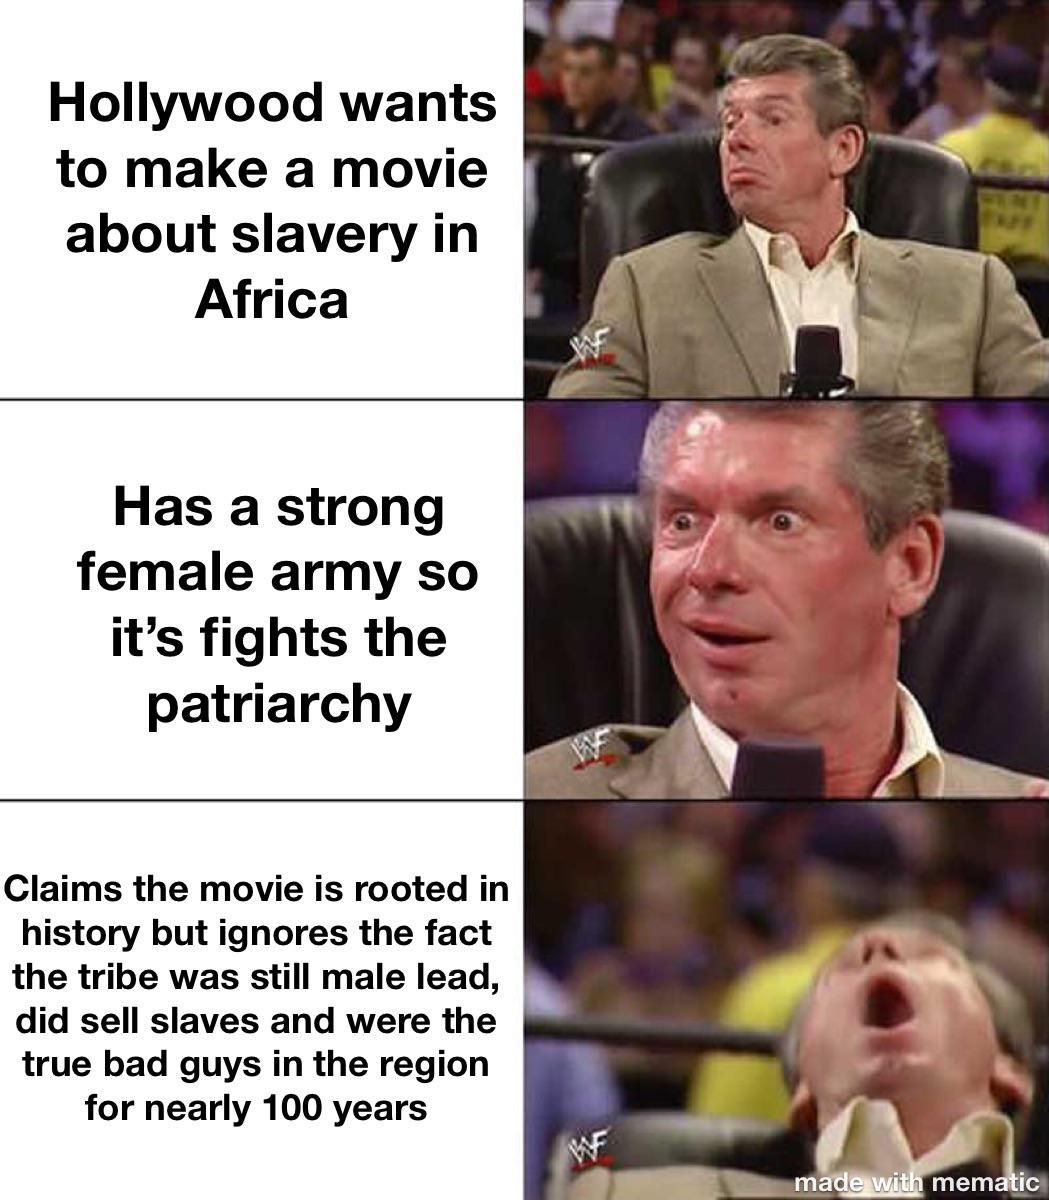 POC can’t be slavers - Hollywood